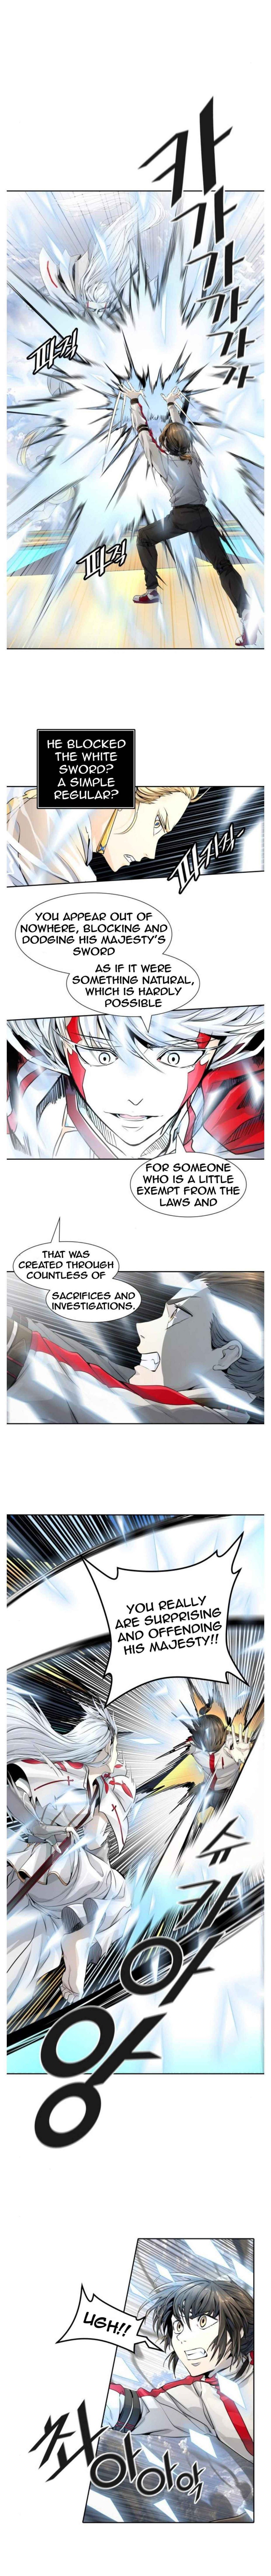 tower of god anime, japanese names for korean citiestower of god anime, tower of god wiki, tower of god crunchyroll, tower of god characters, tower of god reddit, tower of god novel, tower of god mal, tower of god baam, tower of god wiki ghost, tower of god rachel, tower of god khun, tower of god anime studio, tower of god plot, tower of god jahad princess, jahad tower of god, yuri jahad, baam tower of god, endorsi jahad, rachel tower of god, enryu tower of god, tower of god v, tower of god khun ran, khun tower of god age, tower of god baam and khun, tower of god khun marco, khun eduan, tower of god khun death, khun tower of god, maria tower of god, zahard tower of god, jordan tower of god, icarus tower of god, kiseia tower of god, arie tower of god, tower of god wangnan sword, tower of god wangnan power, arkraptor tower of god, karaka tower of god, tower of god team sweet and sour, viole tower of god, jahad, prince tower of god, ja wangnan, tower of god hatz, shibisu tower of god, yeon tower of god, devil of the right arm tower of god, tower of god urek mazino, urek mazino hoodie, urek mazino wallpaper, urek mazino vs enryu, urek mazino cosplay, urek mazino vs jahad, tower of god ranking, tower of god strongest characters, tower of god rachel theory, tower of god rachel stingray, tower of god rachel and baam, tower of god does rachel get a thorn, tower of god rachel season 3, arlene tower of god, fug tower of god, tower of god anime 2020, tower of god ascend, tower of god 444, kami no tou tower of god trailer, genshi otome to kami no tou read, kami no tou tower of god, kami no tou anime, kami no tou episode 1, kami no tou tower of god manga, kami no tou studio, kami no tou wikipedia, kami no tou release date, god of highschool mal, tsugumomo myanimelist, kami no tou wiki, gleipnir anime, arte myanimelist, tower of god studio, tower of god anilist, tamayomi anilist, my next life as a villainess anilist, tower of god anime opening, tower of god fandom, tower of god synopsis, tower of god game, tower of god revie, tower of god manga hiatus,  tower of god anime,  tower of god manga after anime,  tower of god manga return date,  tower of god manga ending,  tower of god manga release date,  tower of god manga reddit,  tower of god manga chapter after anime,  tower of god,  underwater hunt part 2,  underwater hunt part 1,  beyond the sadness,  jujutsu kaisen,  one punch man,  one piece,  attack on titan,  berserk,  fullmetal alchemist,  solo leveling,  the gamer,  log horizon,  sword art online,  12 prince,  the rising of the shield hero the,  tower of god manga ending,  tower of god manga after anime,  tower of god manga hiatus,  tower of god anime,  tower of god manga release date,  tower of god manga chapter after anime,  tower of god manga ending,  tower of god manga wiki,  tower of god manga return date,  tower of god manga after anime,  tower of god manga reddit,  tower of god manga review,  tower of god manga vs anime,  tower of god manga continuation,  is tower of god manga finished,  is tower of god manga over,  tower of god mangahelpers,  tower of god manga ending,  tower of god manga after anime,  tower of god manga chapter after anime,  kami no tou manga after anime,  tower of god webtoon,  tower of god anime,  tower of god wiki,  tower of god manga return date,  tower of god,  the god of high school,  noblesse,  the breaker,  underwater hunt part 2,  underwater hunt part 1,  beyond the sadness,  tower of god manga ending,  kami no tou manga after anime,  tower of god manga after anime,  tower of god webtoon,  tower of god wiki,  tower of god manga chapter after anime,  kami no tou manga after anime,  kami no tou manga season 2,  kami no tou manga mal,  kami no tou manga union,  kami no tou manga español webtoon,  kami no tou manga portugues,  kami no tou manga wiki,  kami no tou season 1 manga,  kami no tou season manga,  is kami no tou finished,  can non japanese make anime,  can non japanese make manga,  does anime have to be japanese, tower of god, tower of god manga, tower of god online, read tower of god, read tower of god manhwa, tower of god manhwa, kami no tou manga, kami no tou chapter, kami no tou, read kami no tou, read kami no tou manga, read kami no tou manhwa, kami no tou manhwa, tower of god chapter 497,